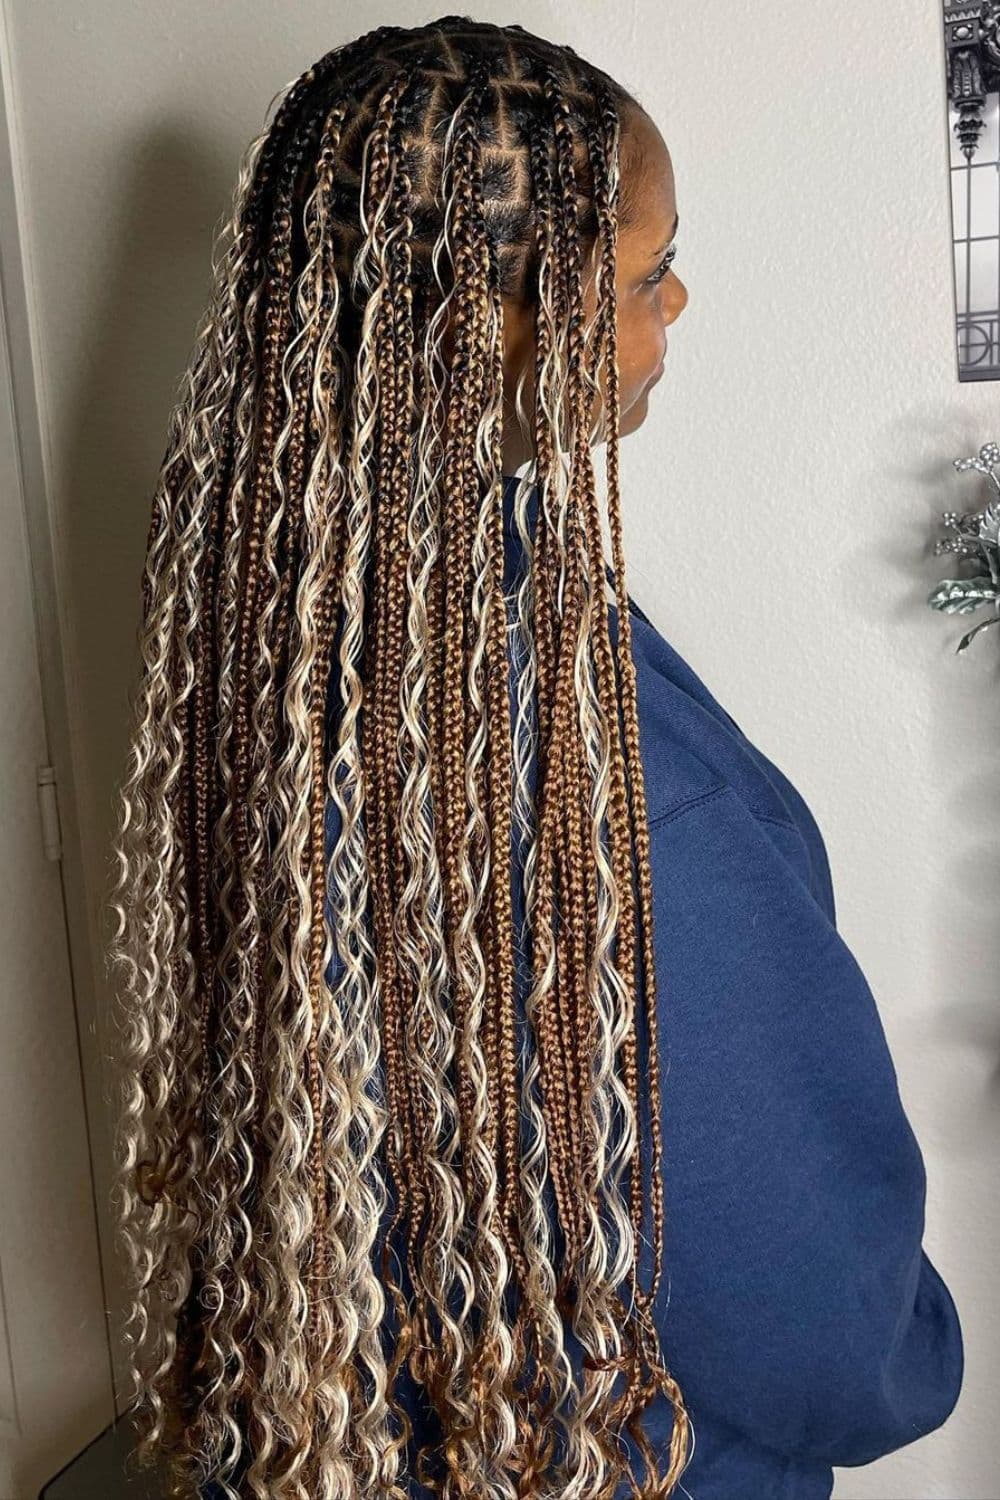 A woman with long brown and blonde knotless goddess braids.